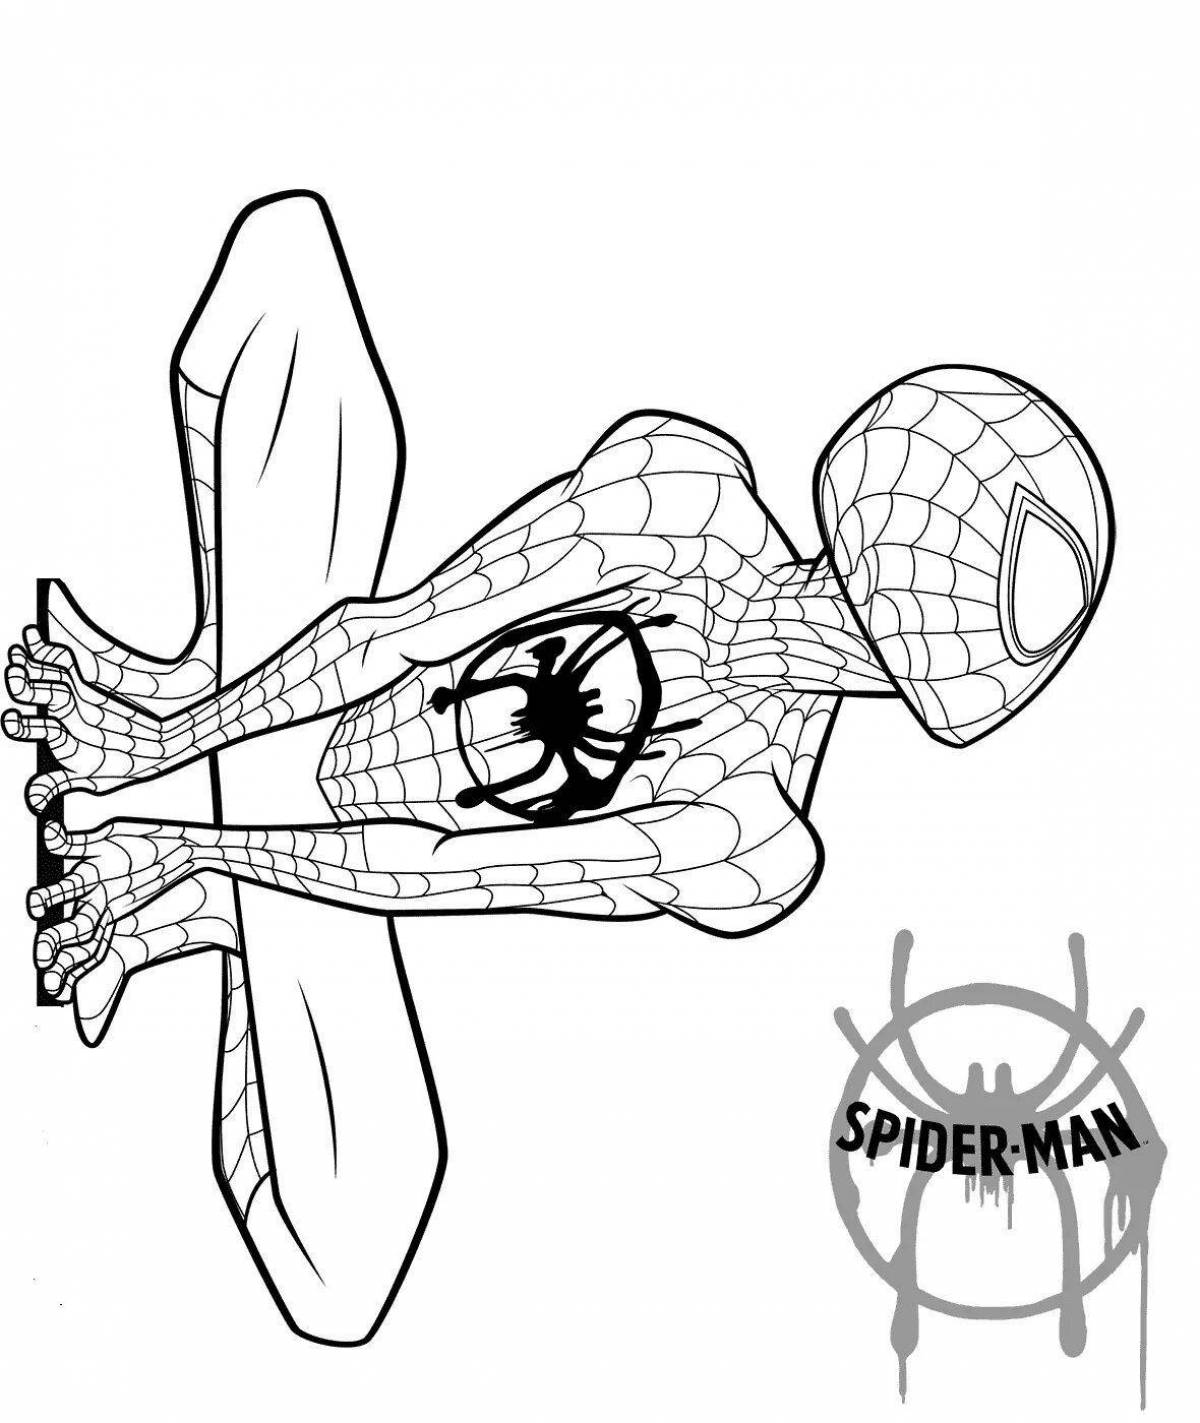 Spiderman's monstrous ghost coloring book